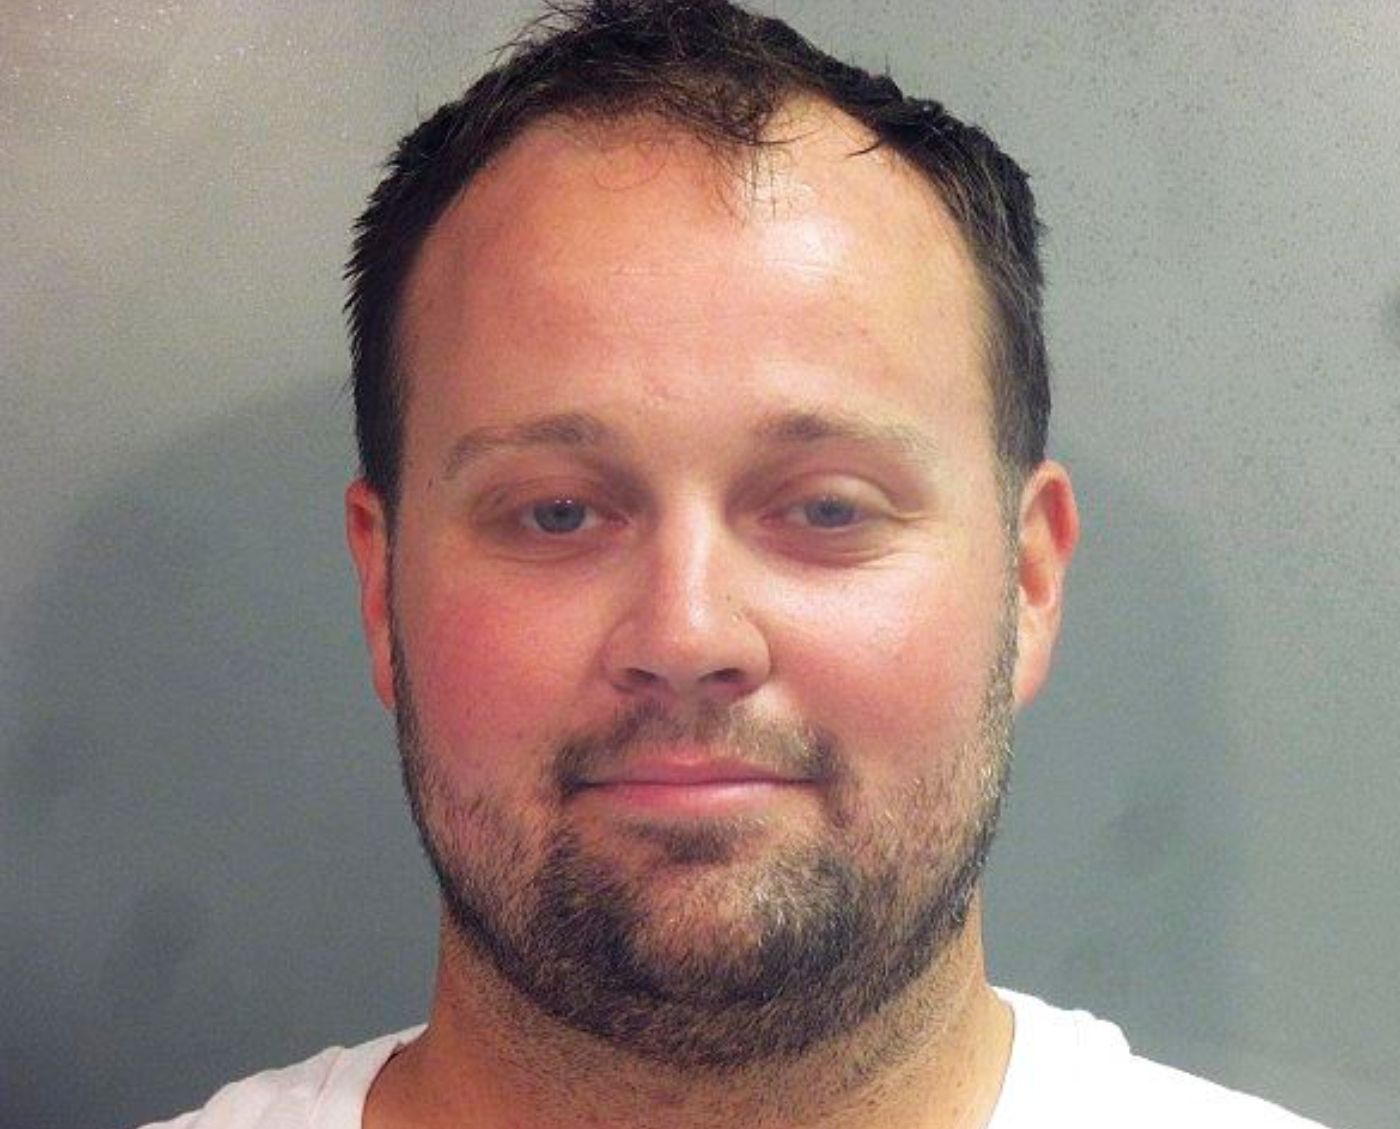 19 Kids and Counting The Charges Against Josh Duggar Explained